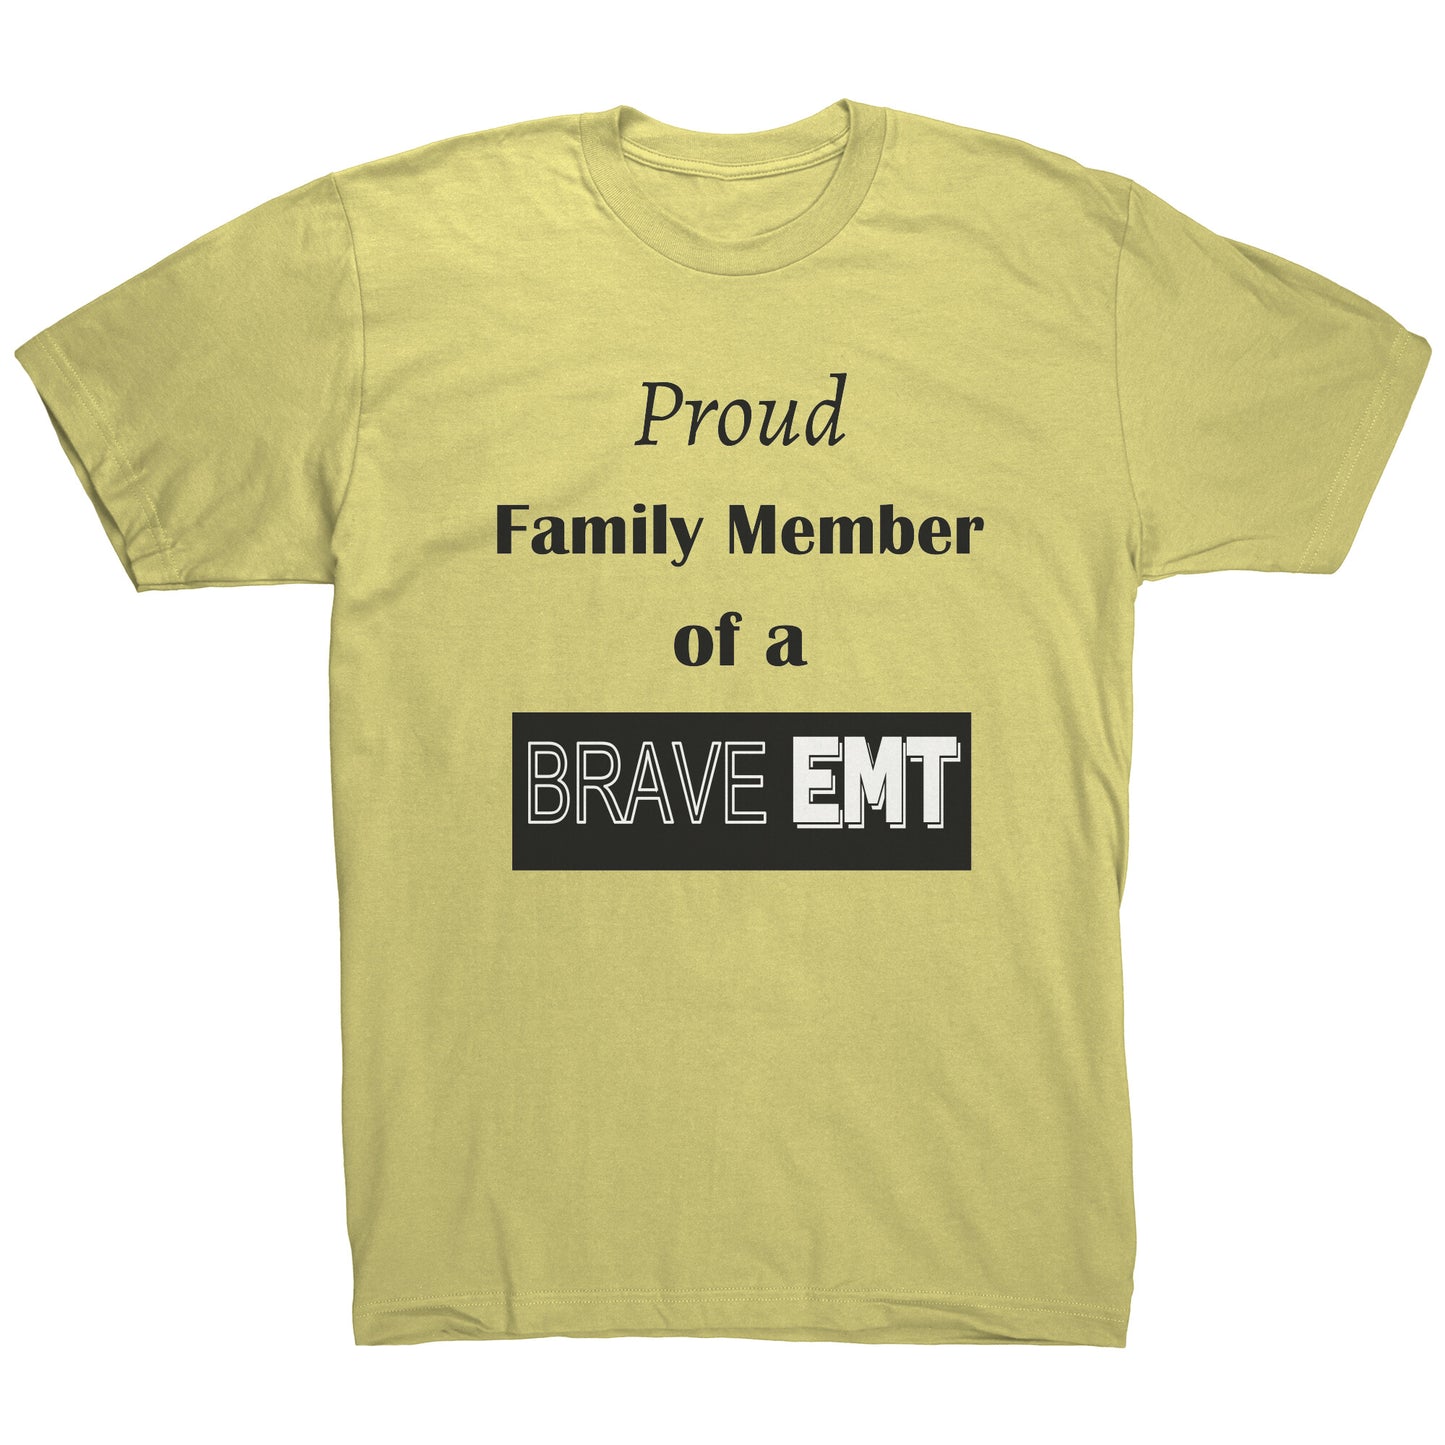 Proud Family Member of a Brave EMT Lettering Mens Shirt - Signs and Seasons Gifts